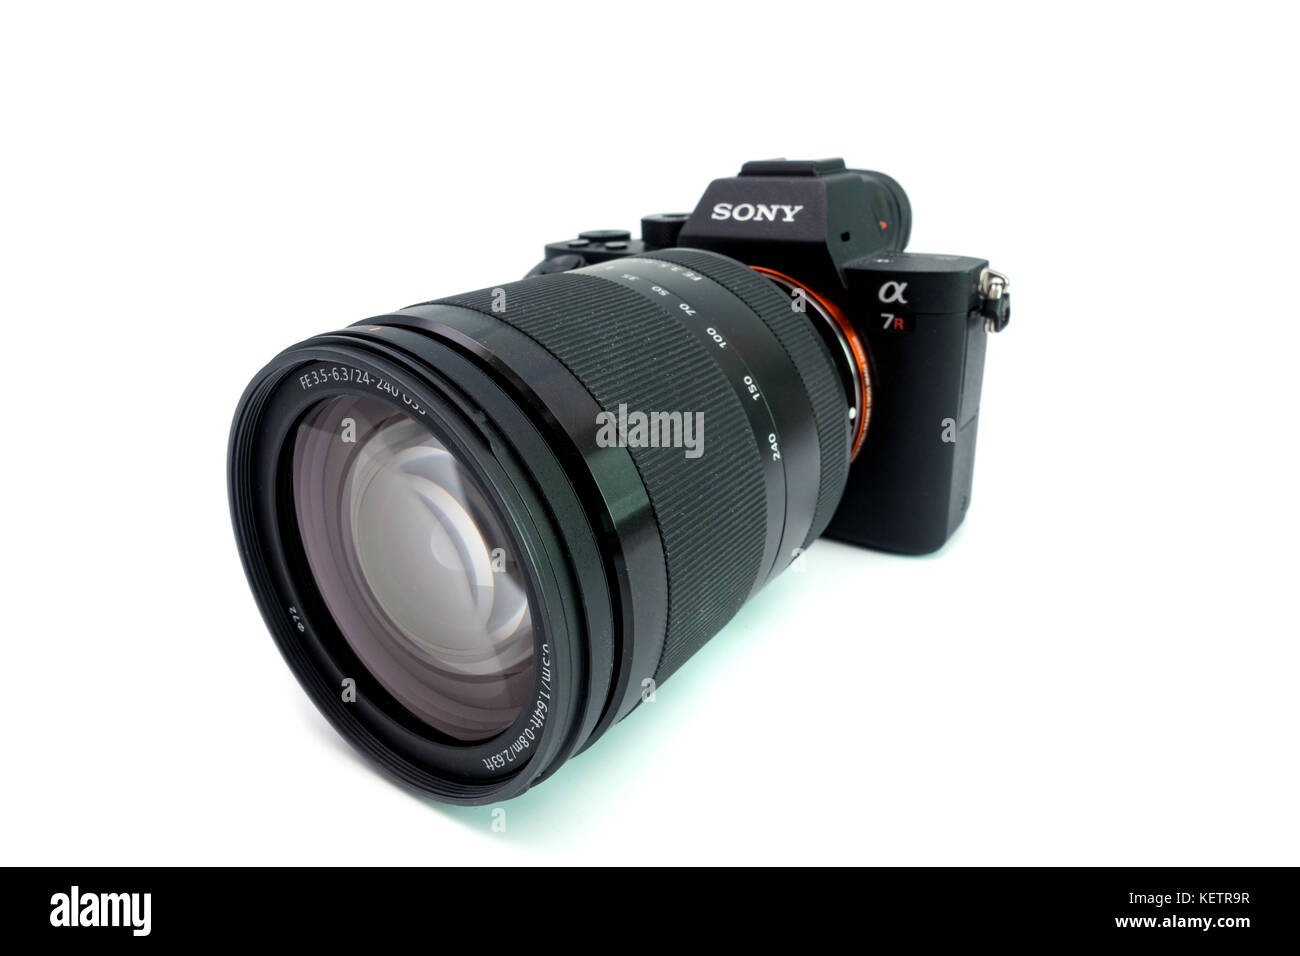 BERLIN, GERMANY - June 06, 2016: Sony a7R II Alpha Mirrorless Fast-focusing and 4K-shooting Digital Camera with Sony 24-240 mm lens Stock Photo